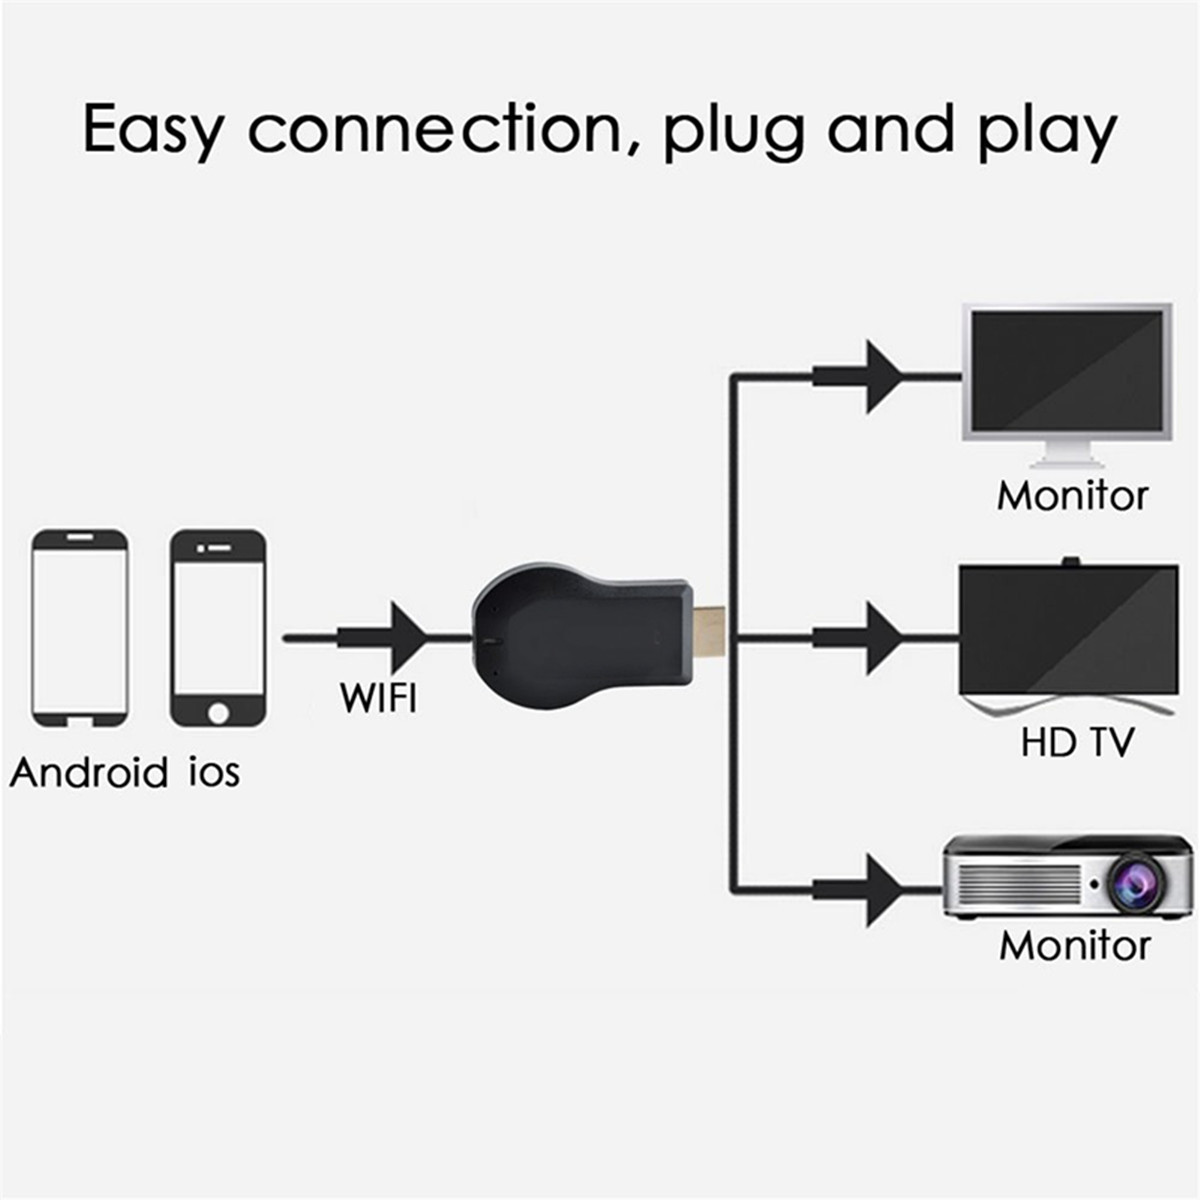 Miracast-M2-HD-1080P-Plus-WiFi-Display-Dongle-Miracast-TV-Dongle-DLNA-982127